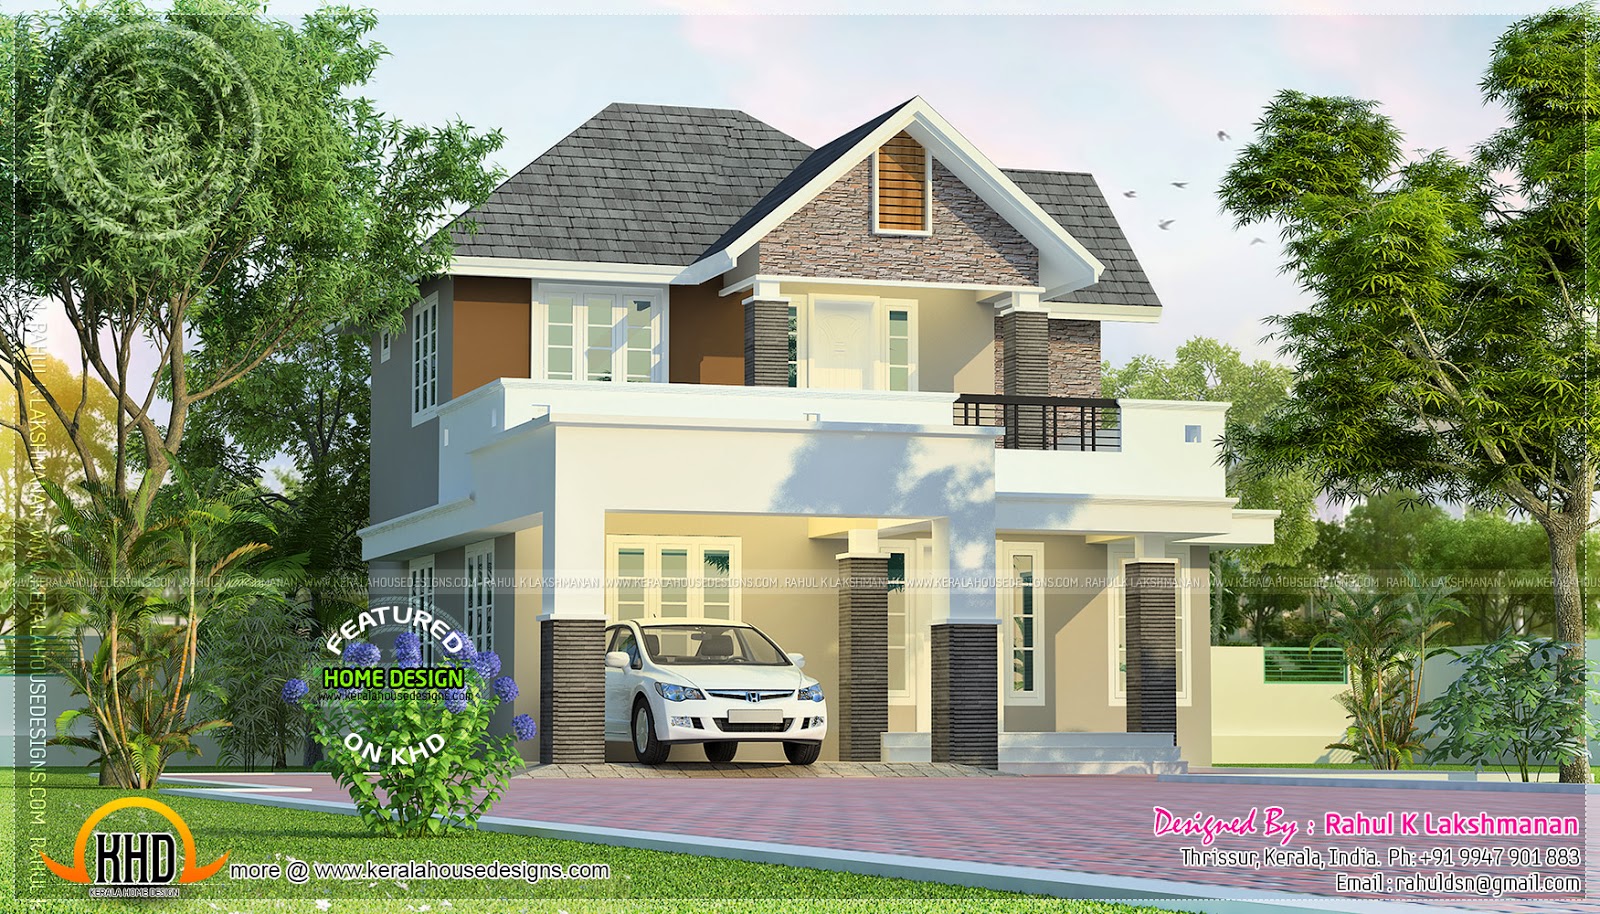 Beautiful Small House Design also Zimbabwe House Plans Designs 